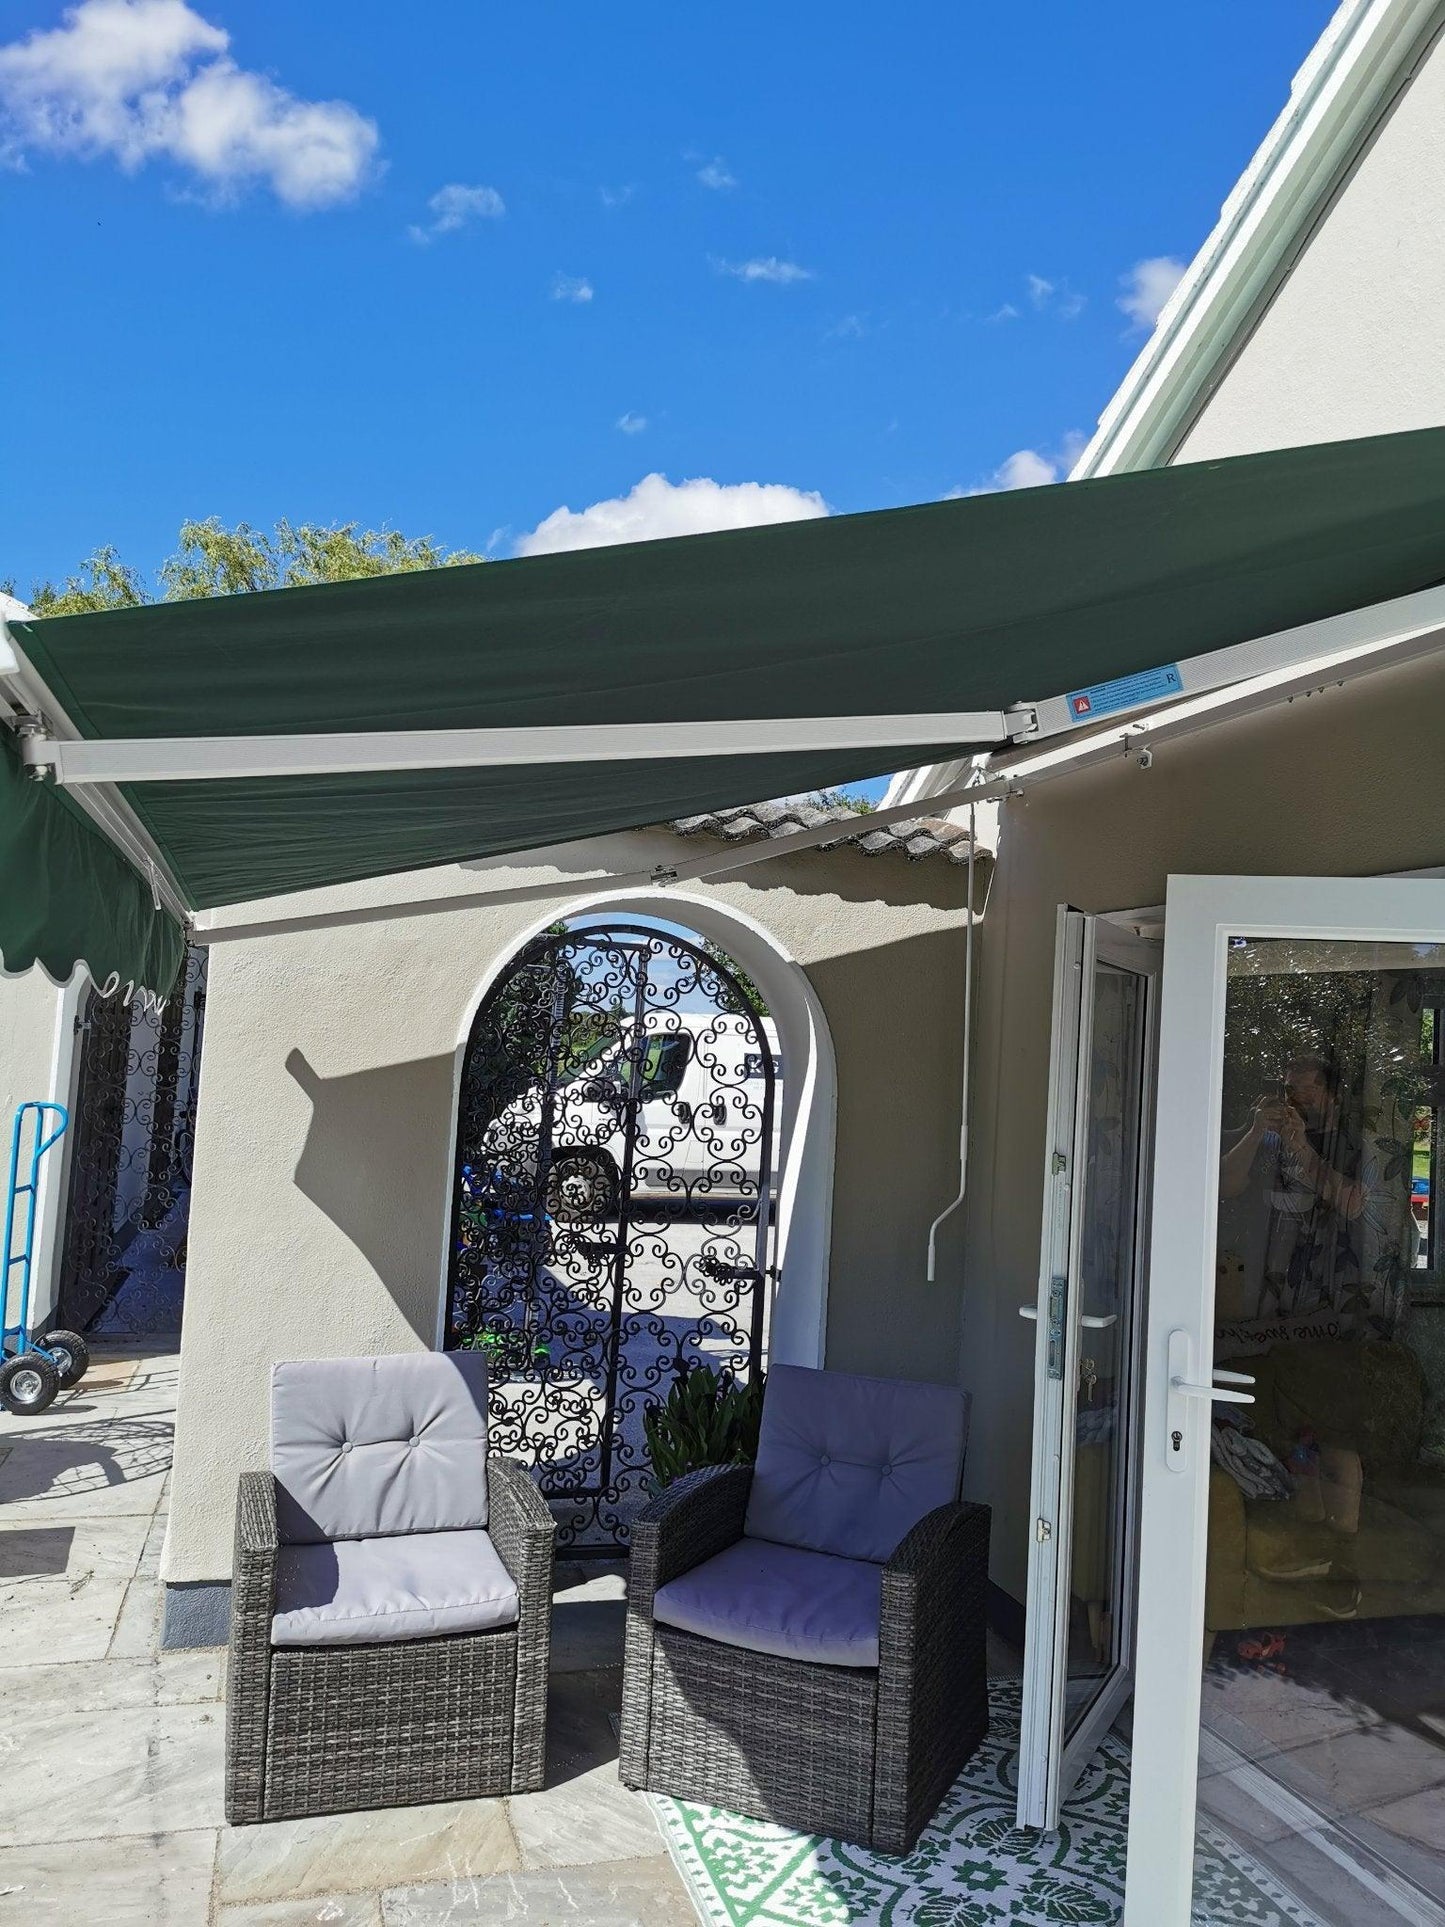 RETRACTABLE AWNING 3M X 2.5M GREEN (9.8FT X 8.2FT) - Keane Gardens